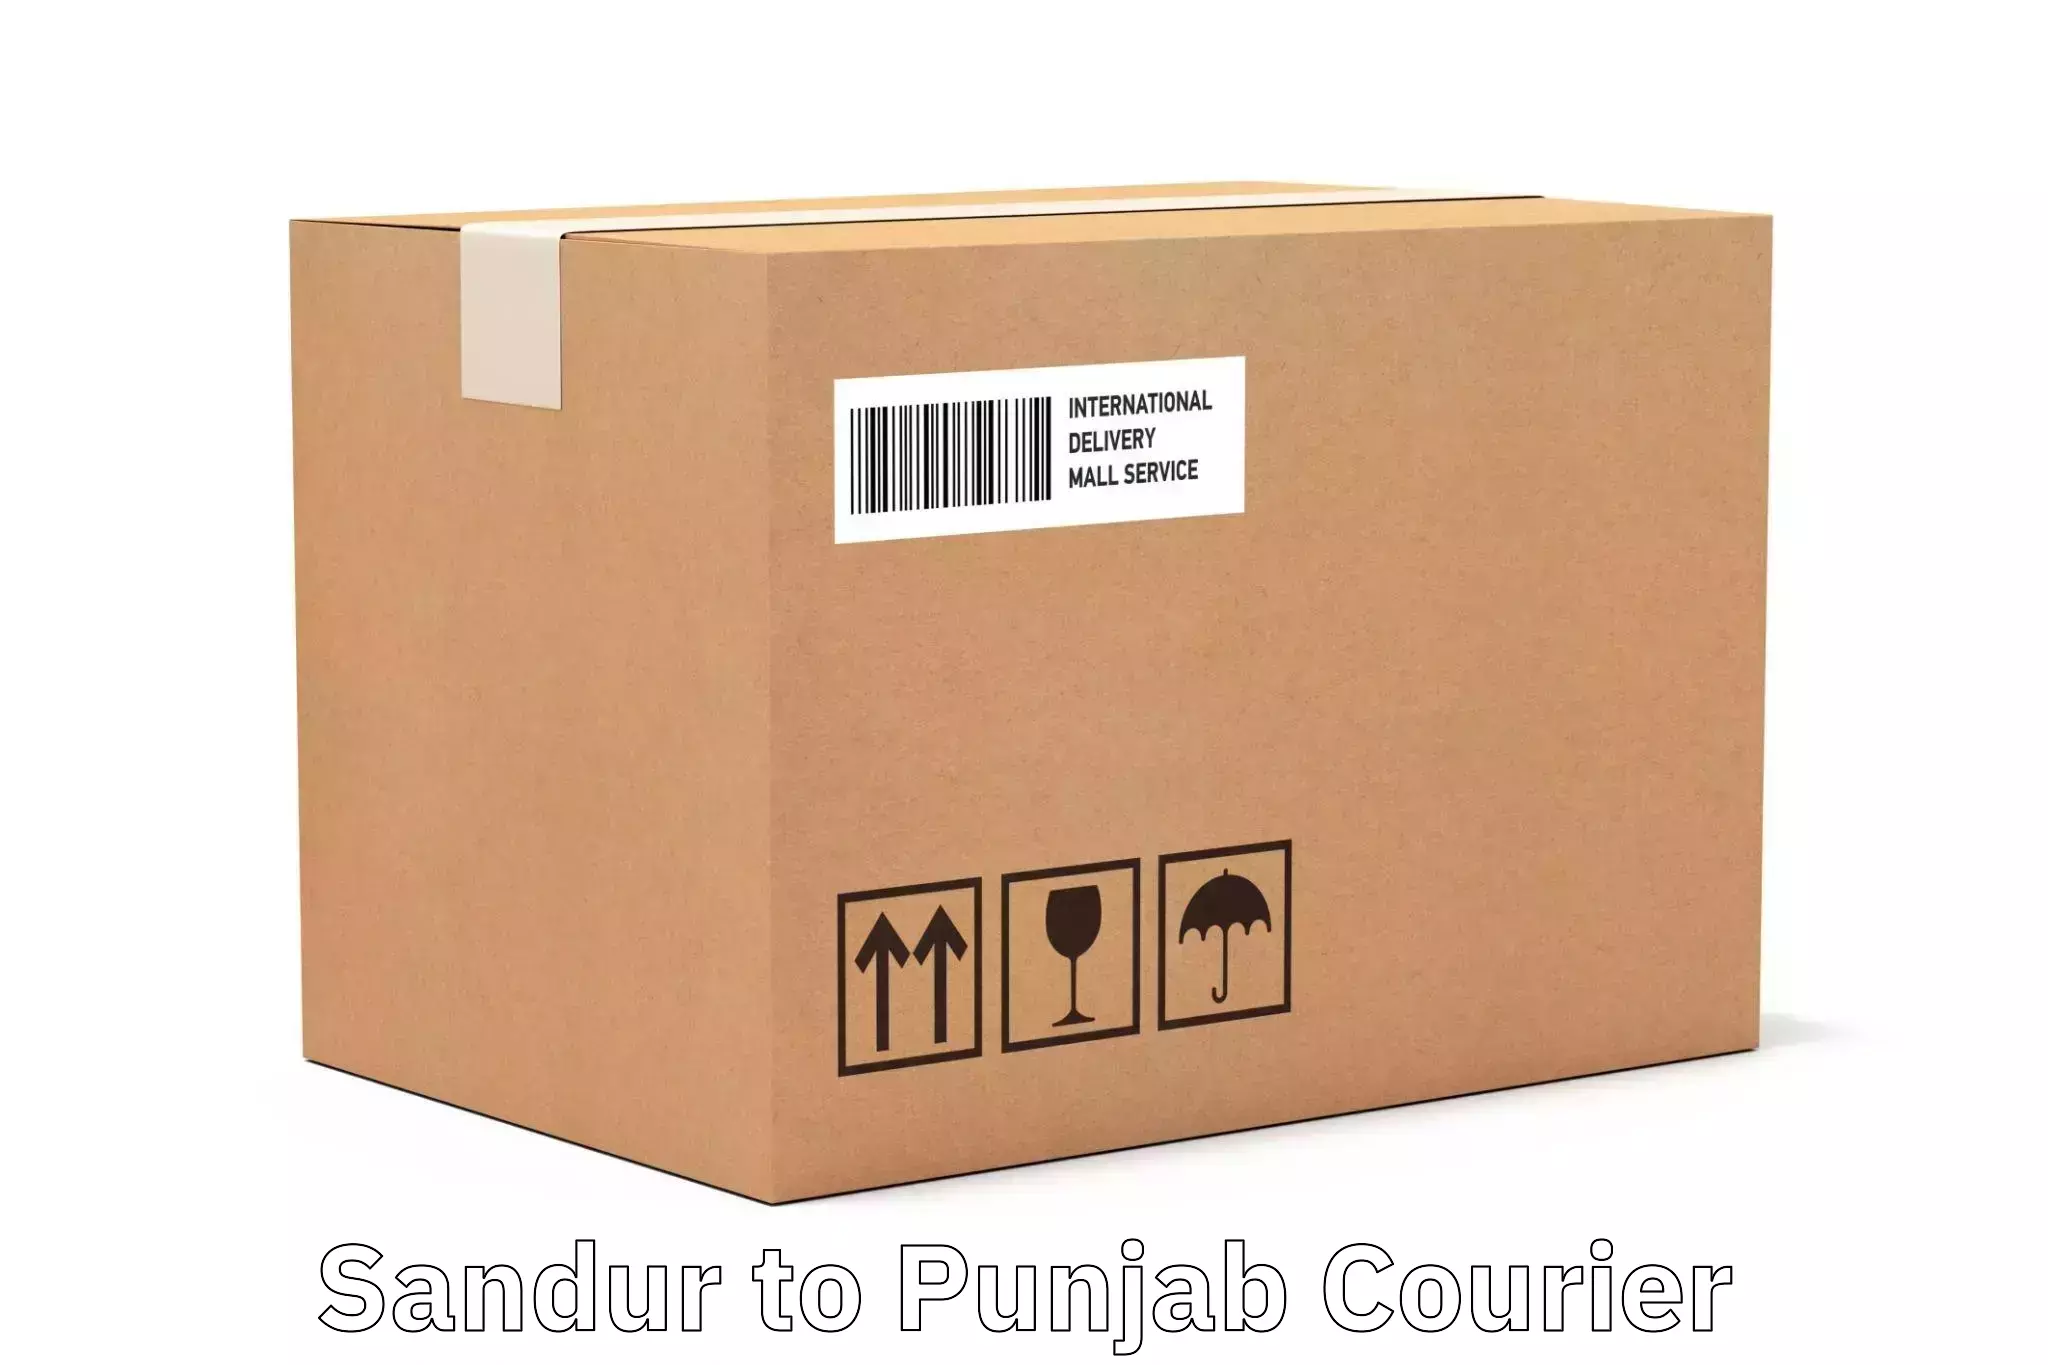 High value parcel delivery Sandur to Patiala